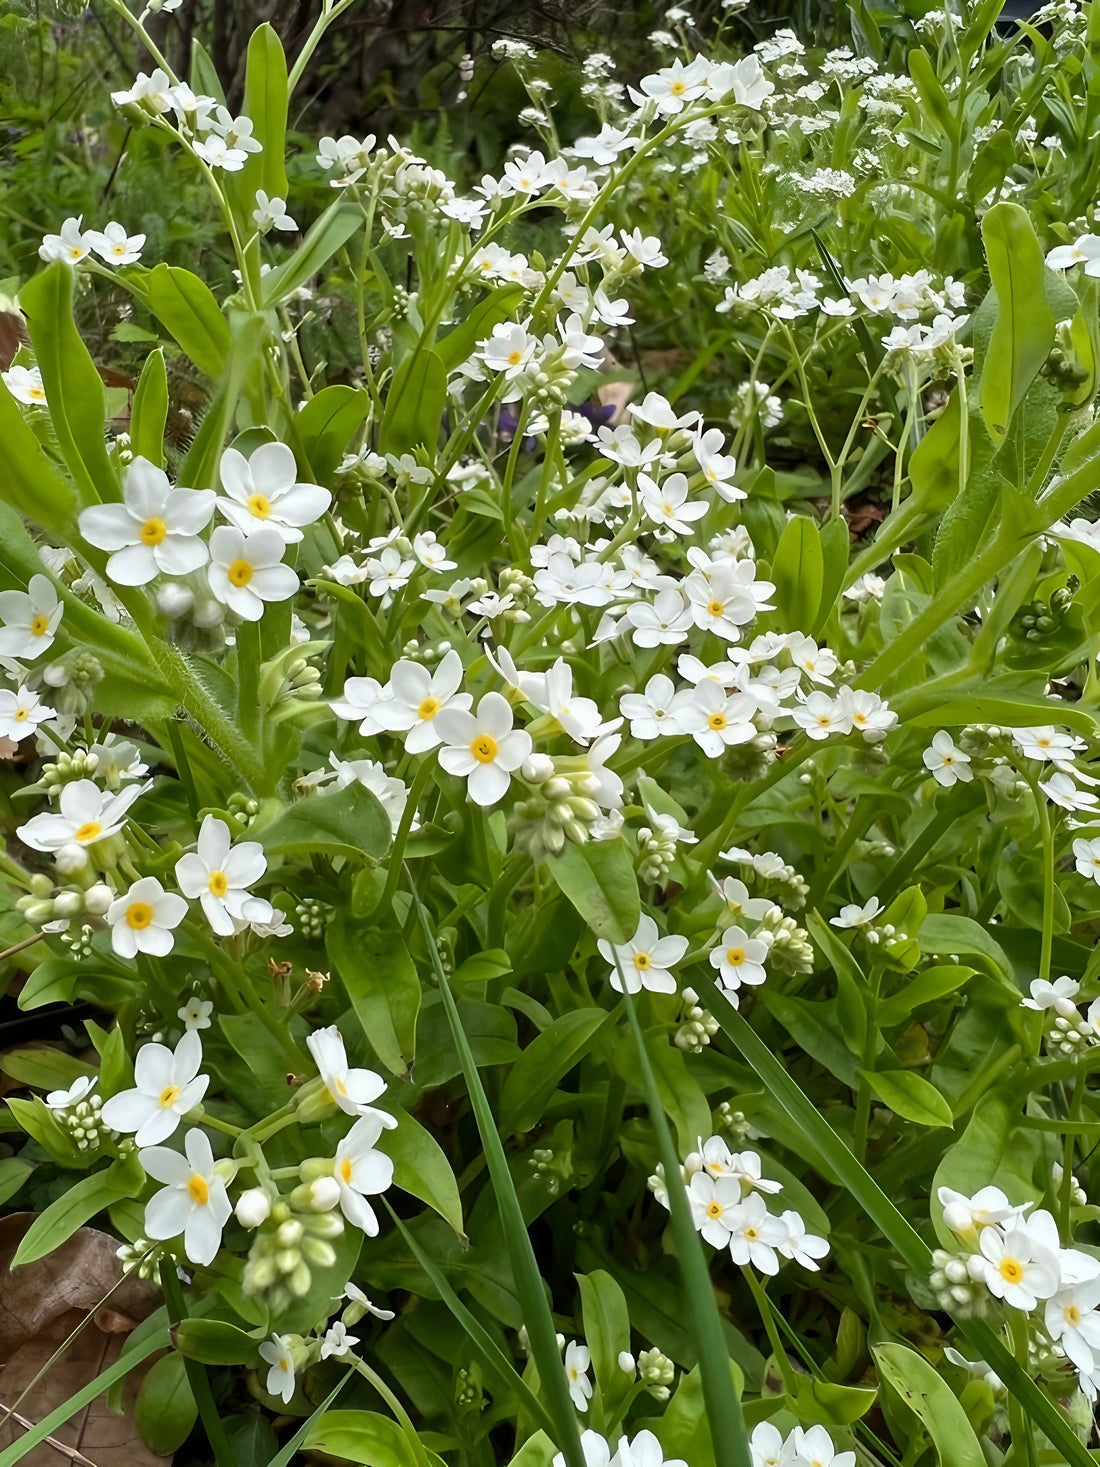 Close-up of a Forget-me-not (White) plant with delicate white blossoms in a forest environment